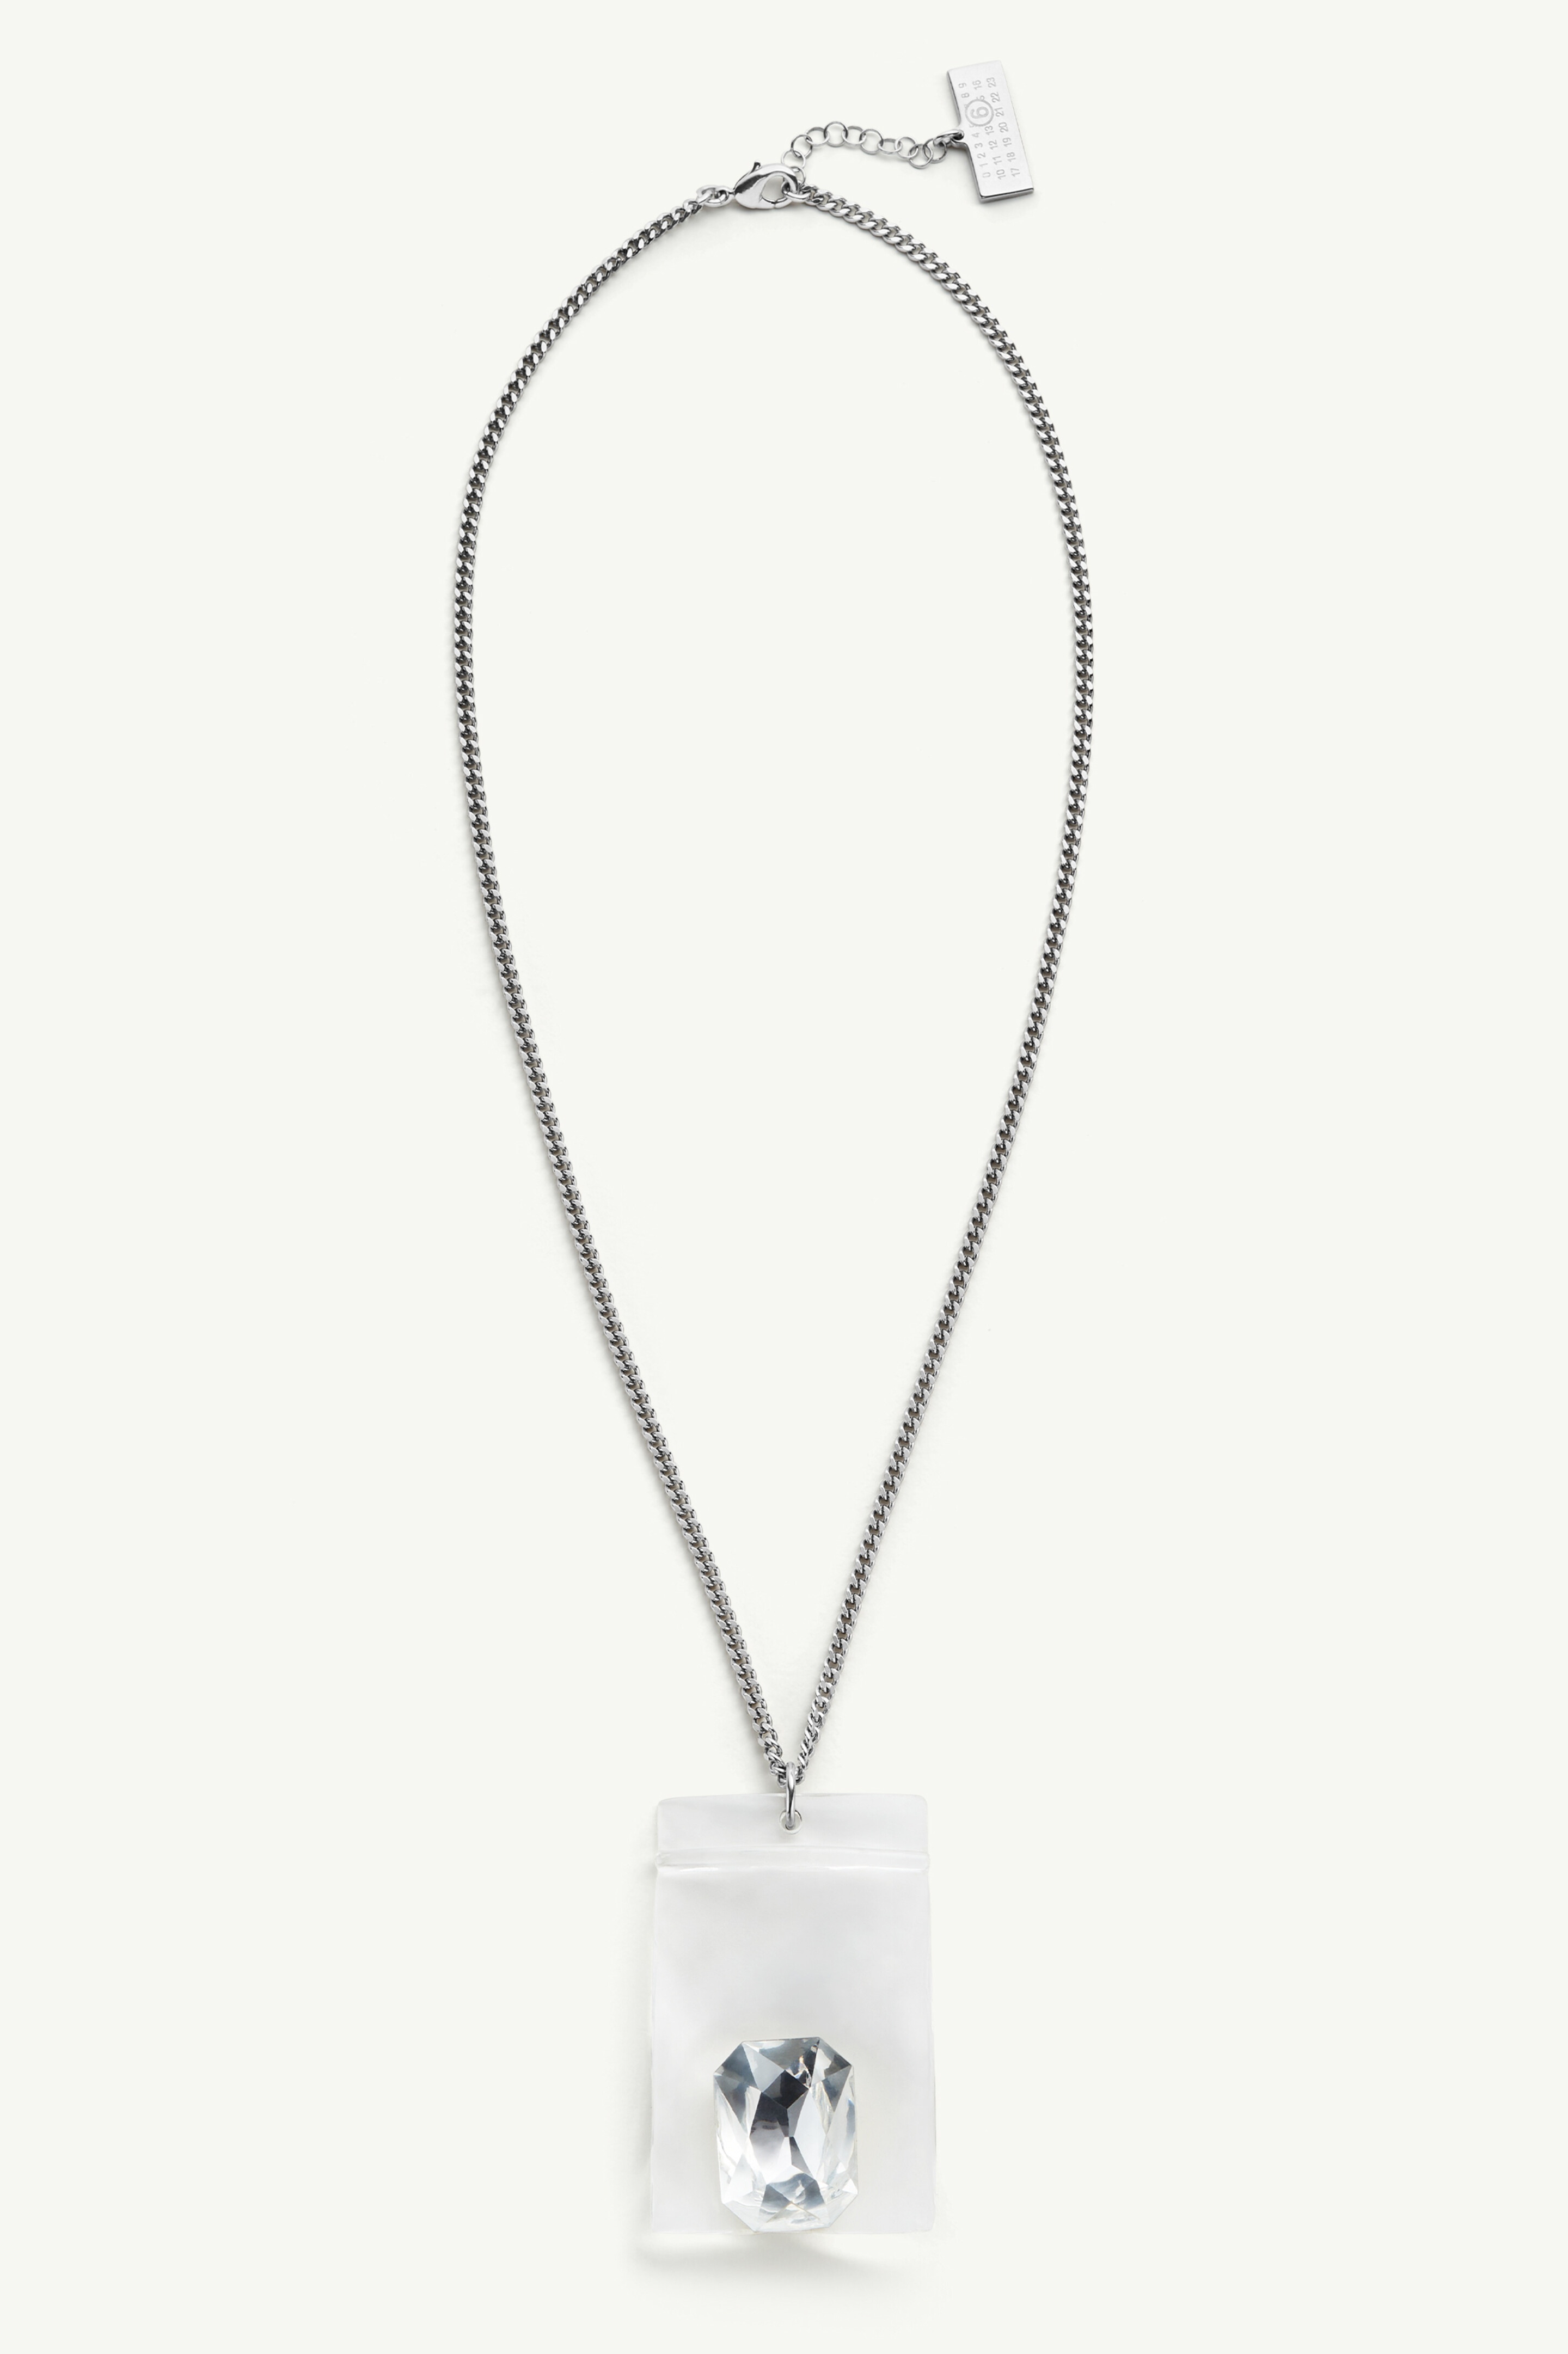 Stone in Plastic Bag Necklace - 1